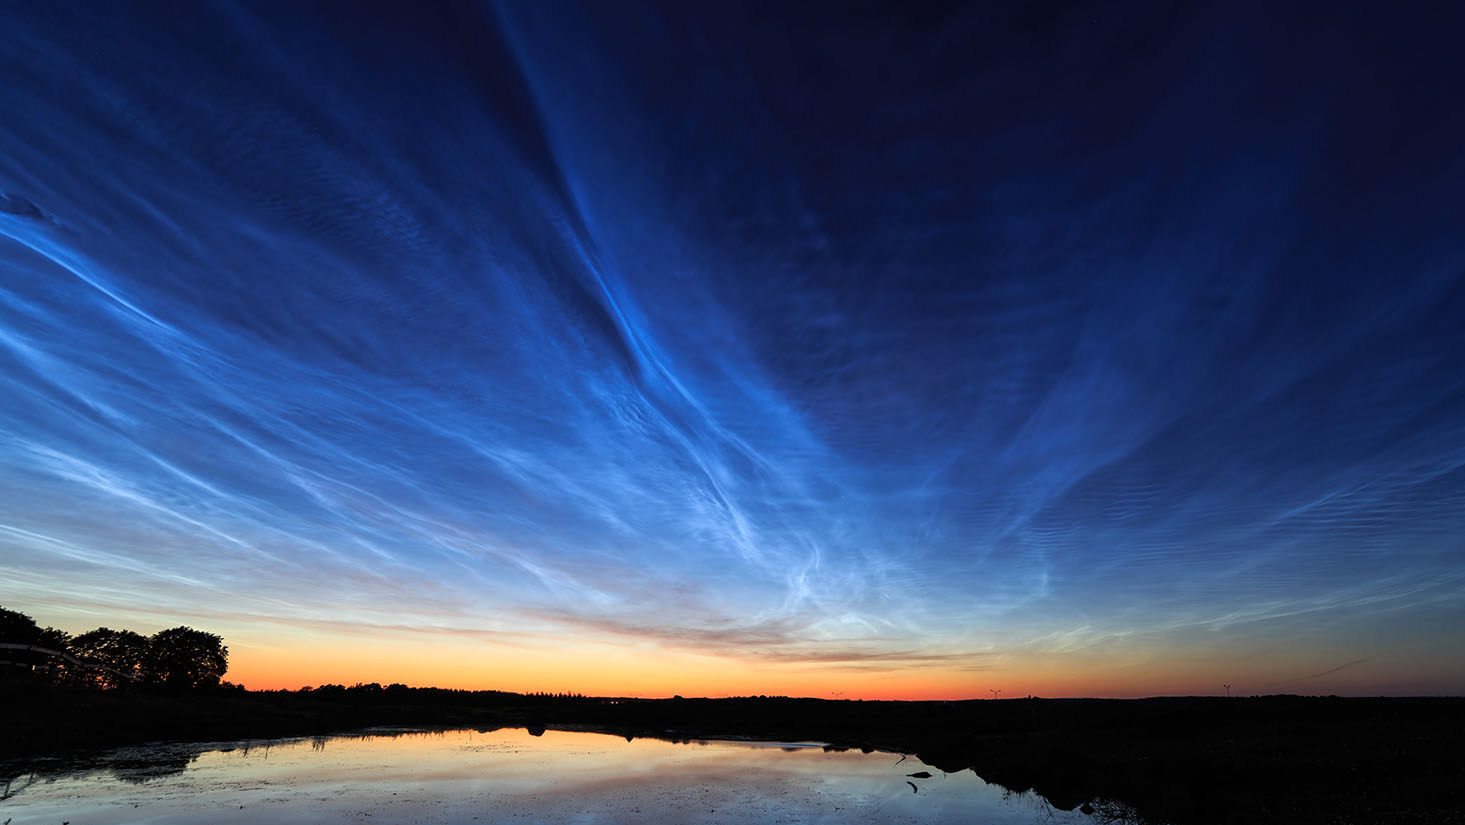 Noctilucent clouds hang over a lake at sunset. (Photo: Wikimedia)